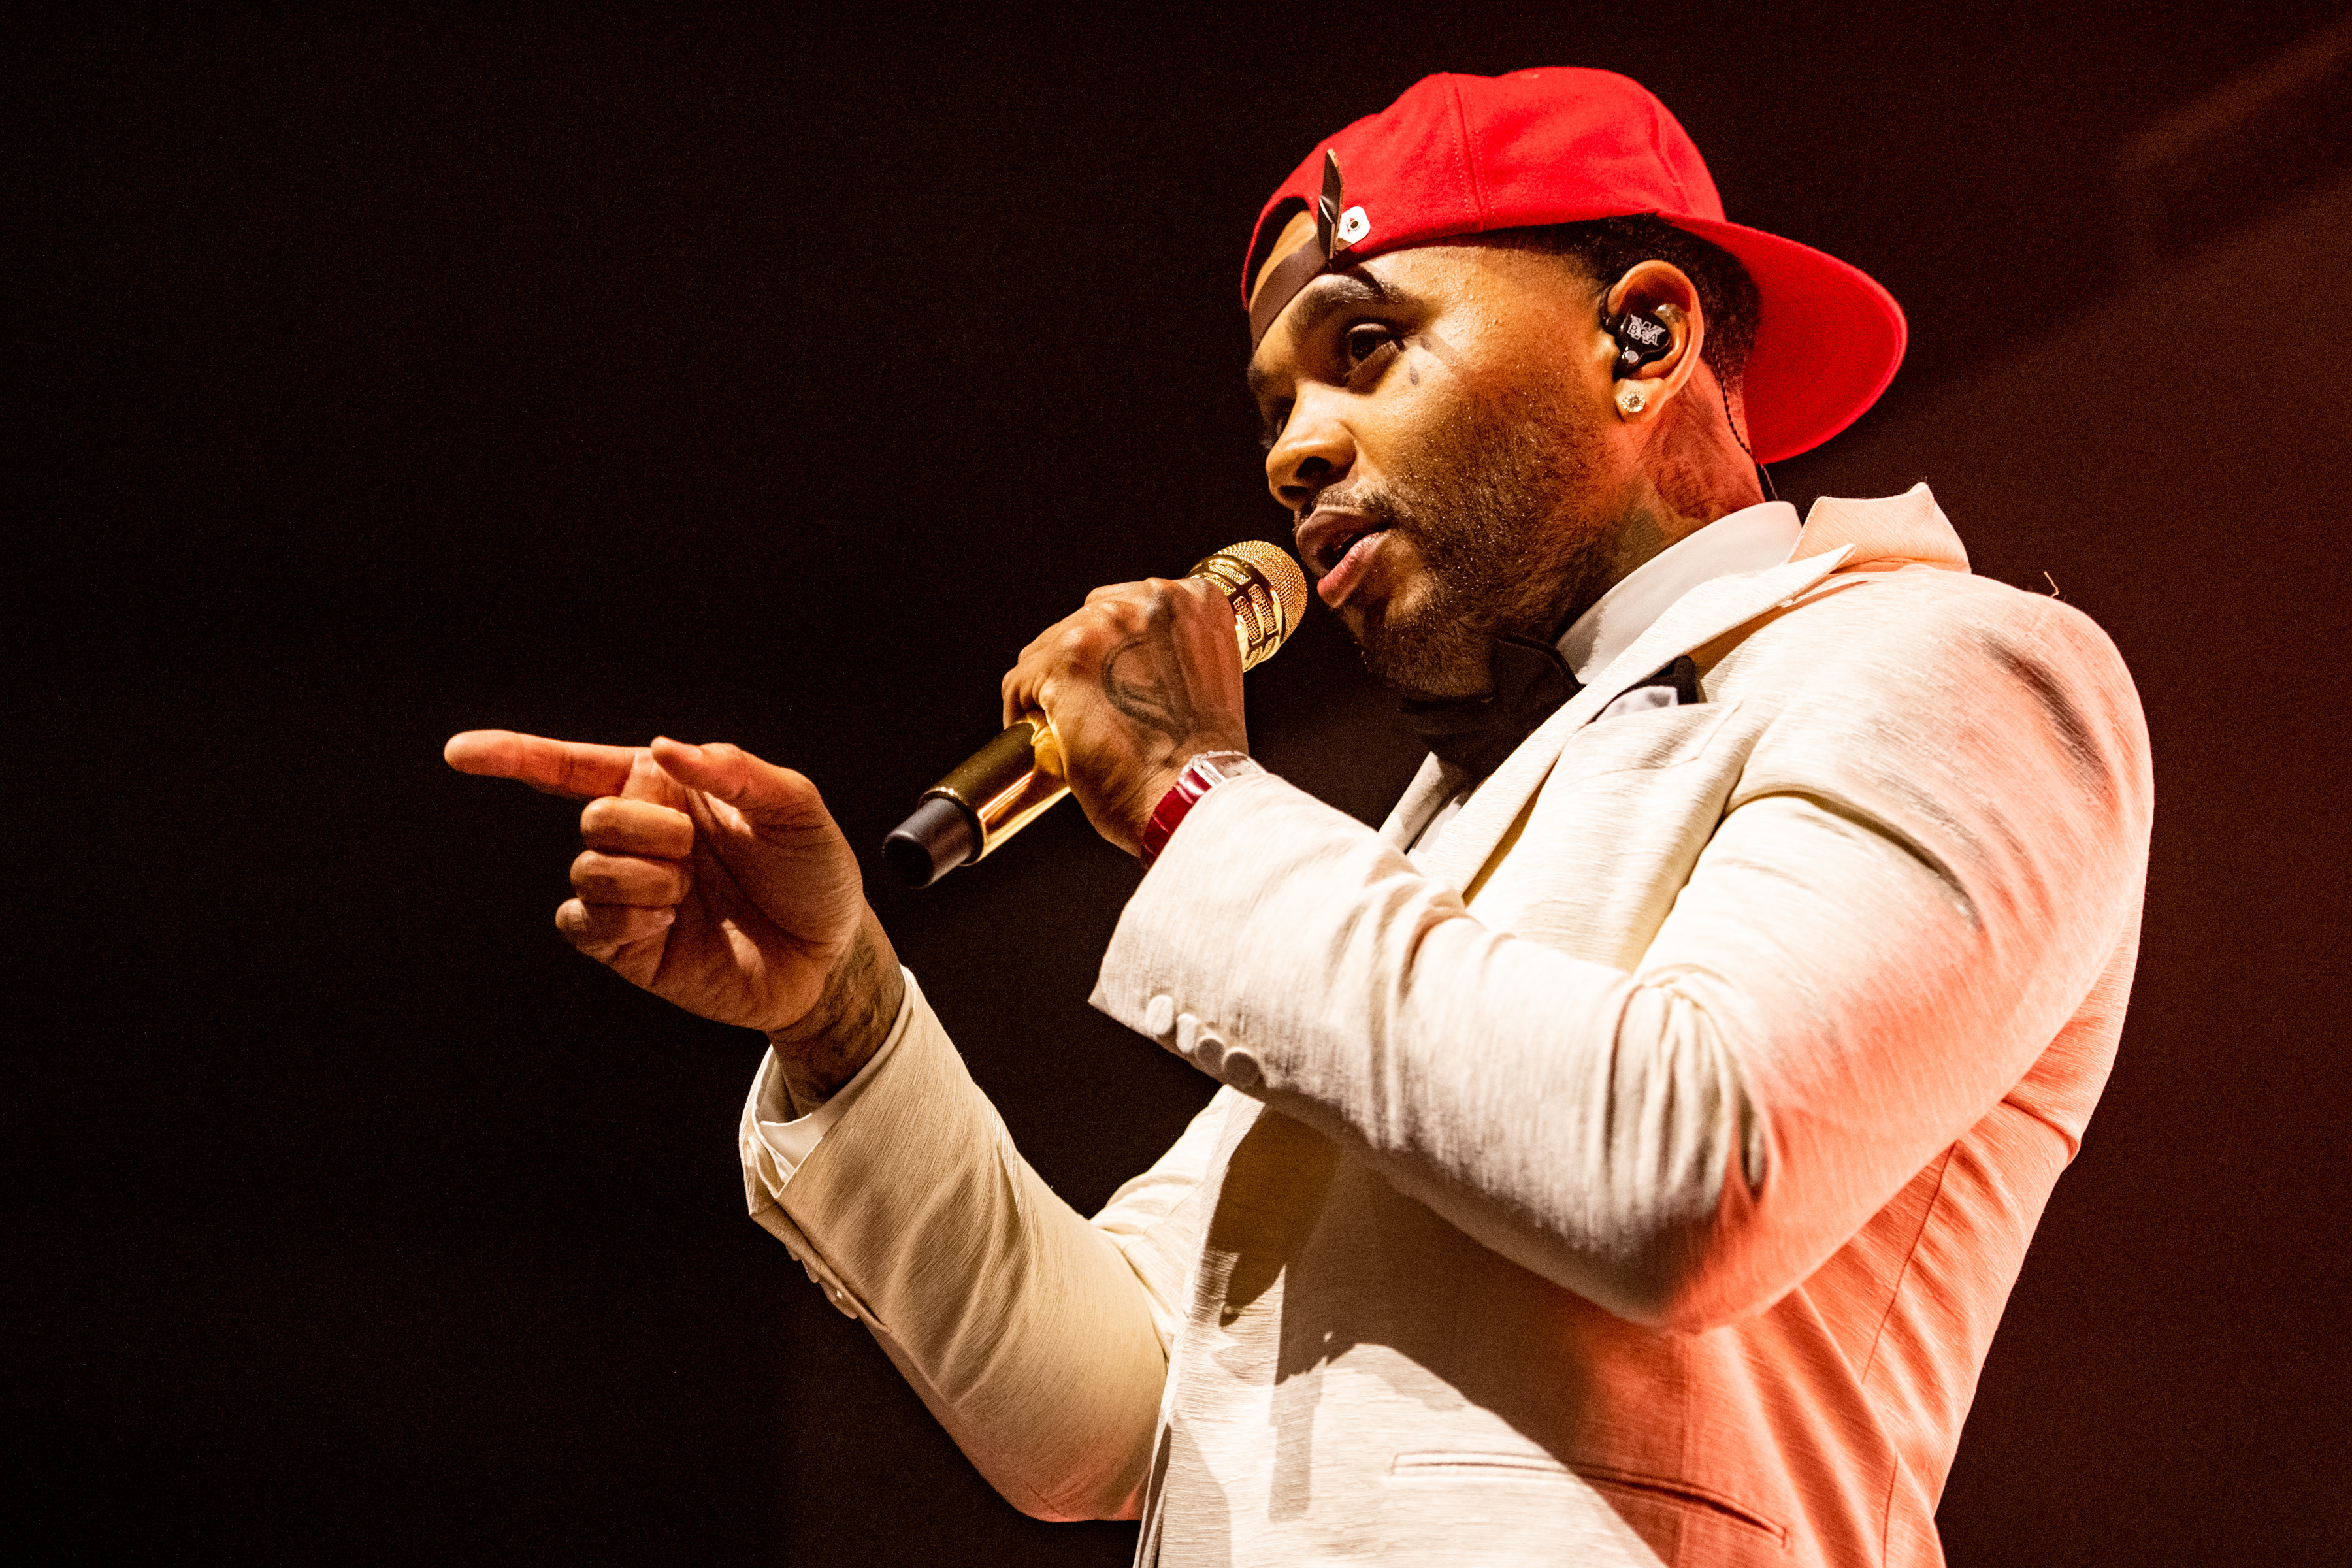 Kevin Gates Gets “Vulnerable” With Mike Tyson, Reveals He Was Molested As A Child